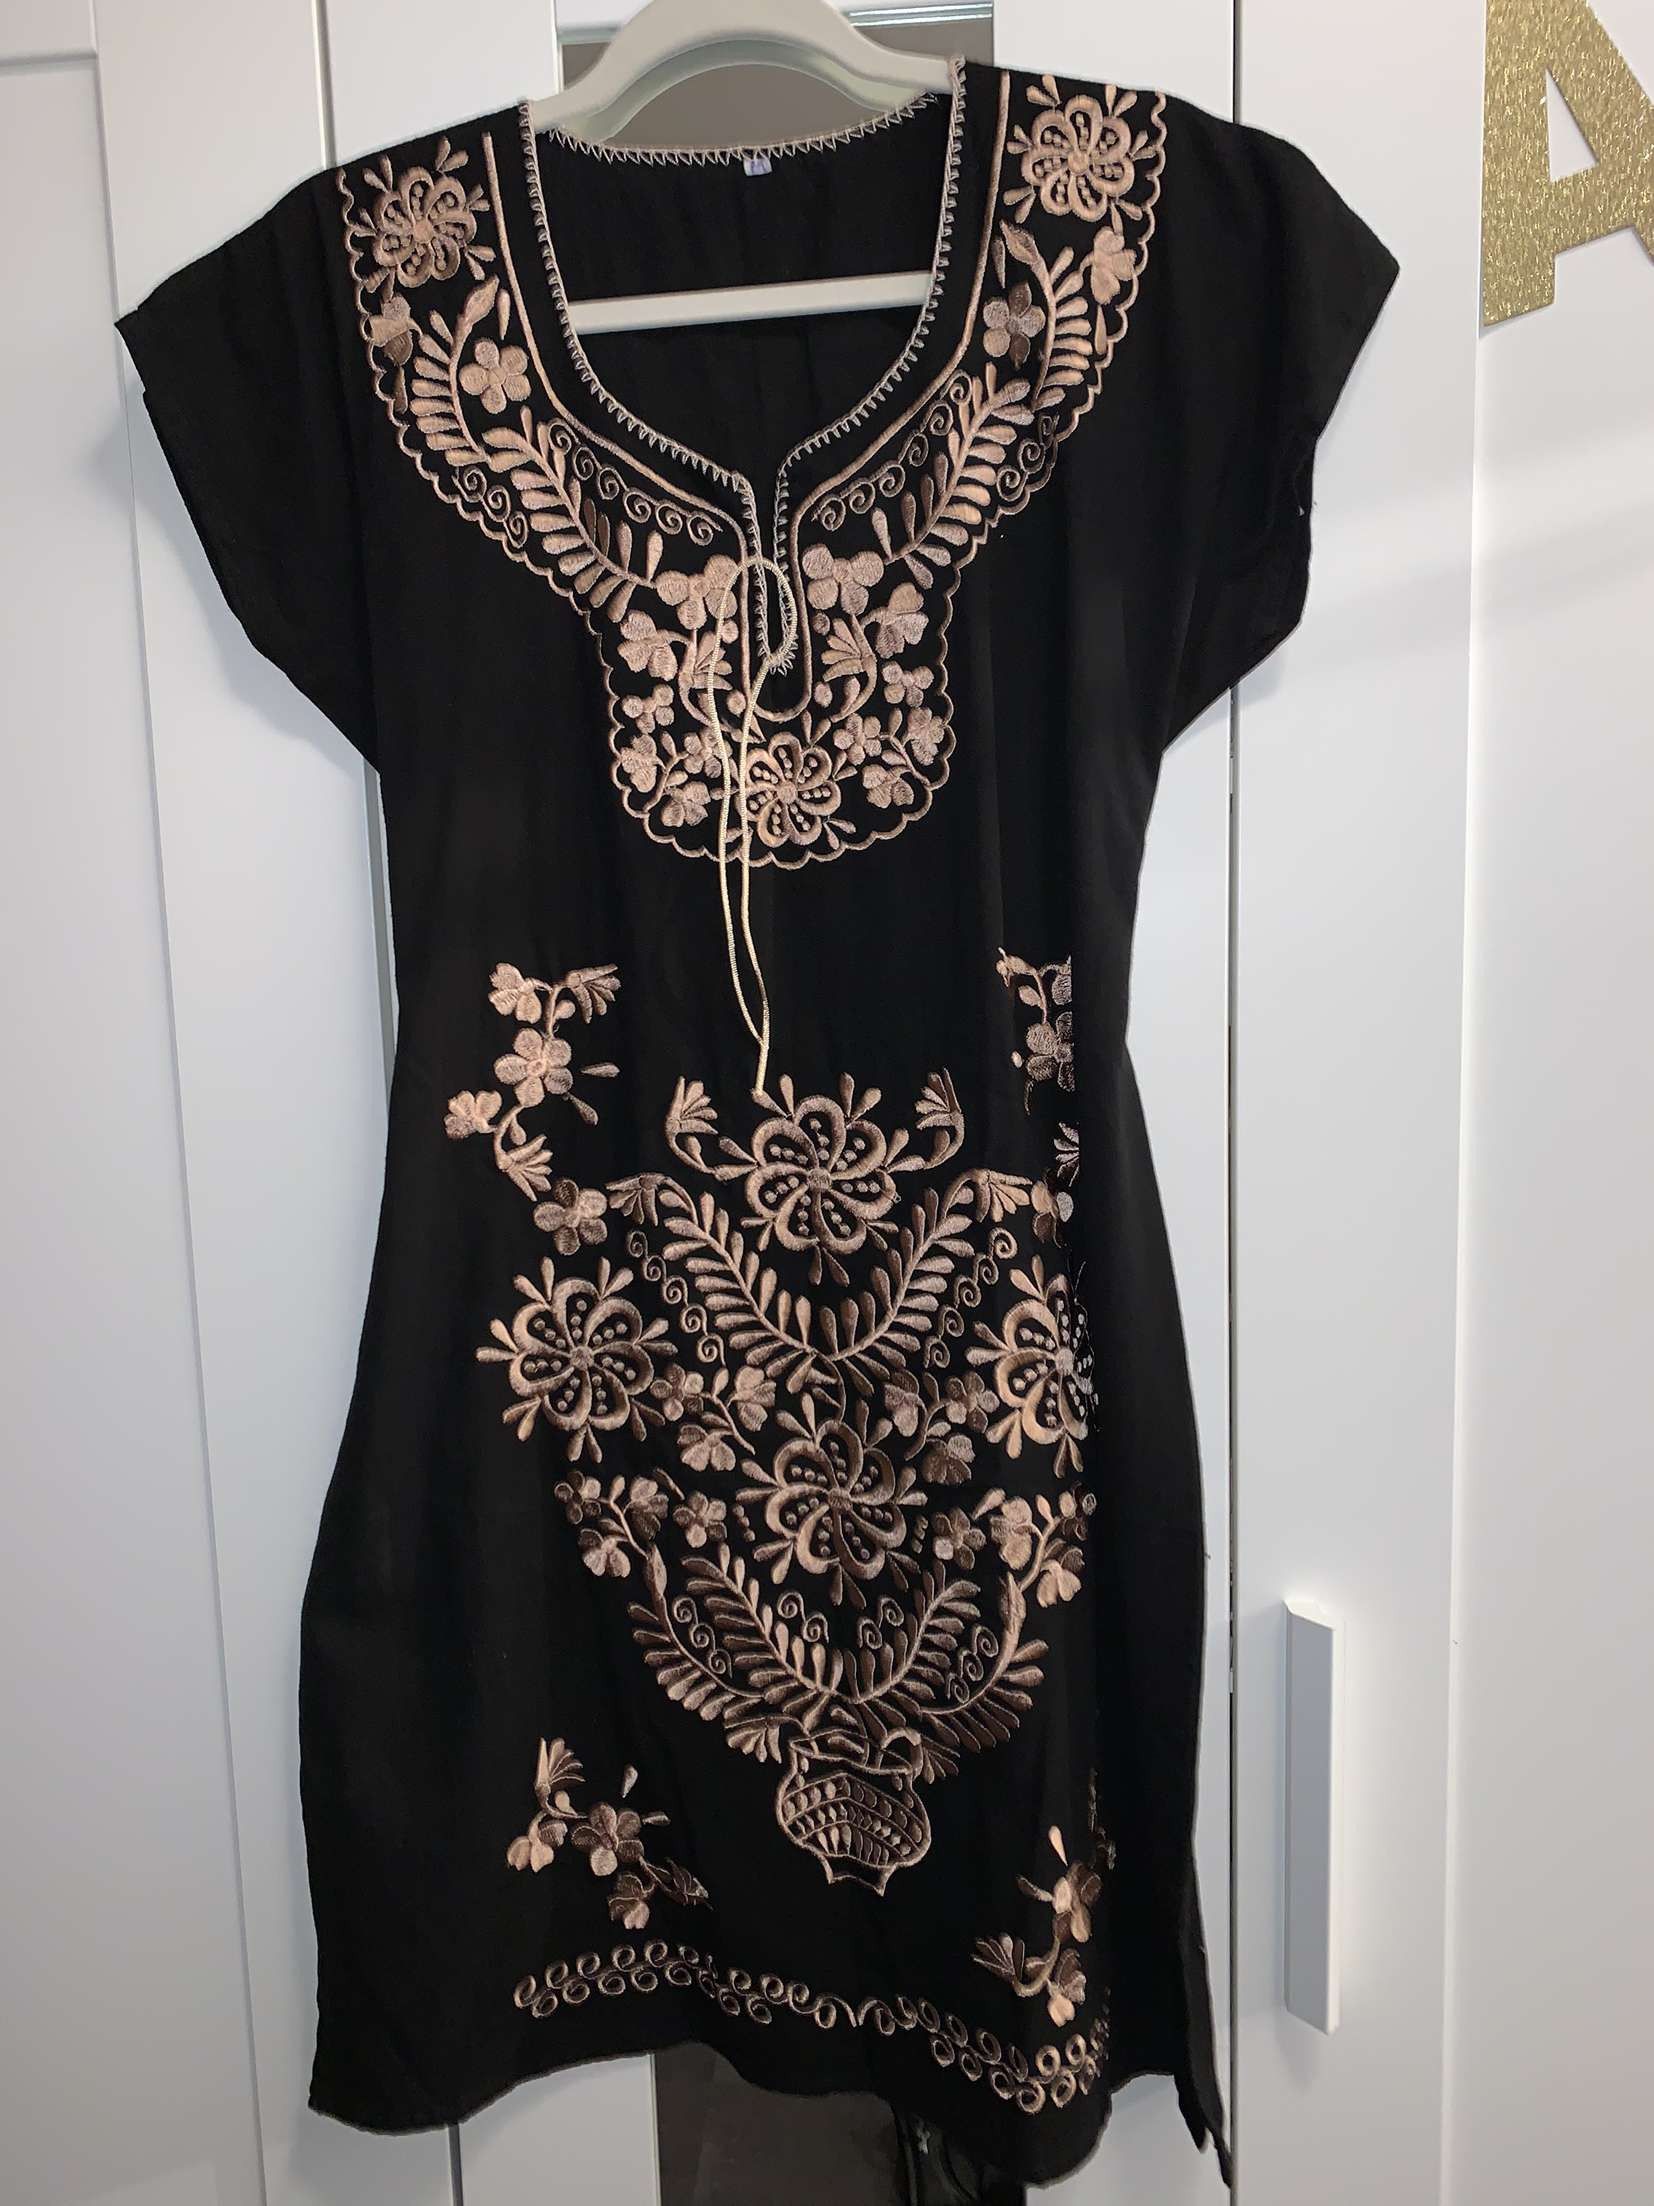 BEAUTIFUL EMBROIDERED DRESS